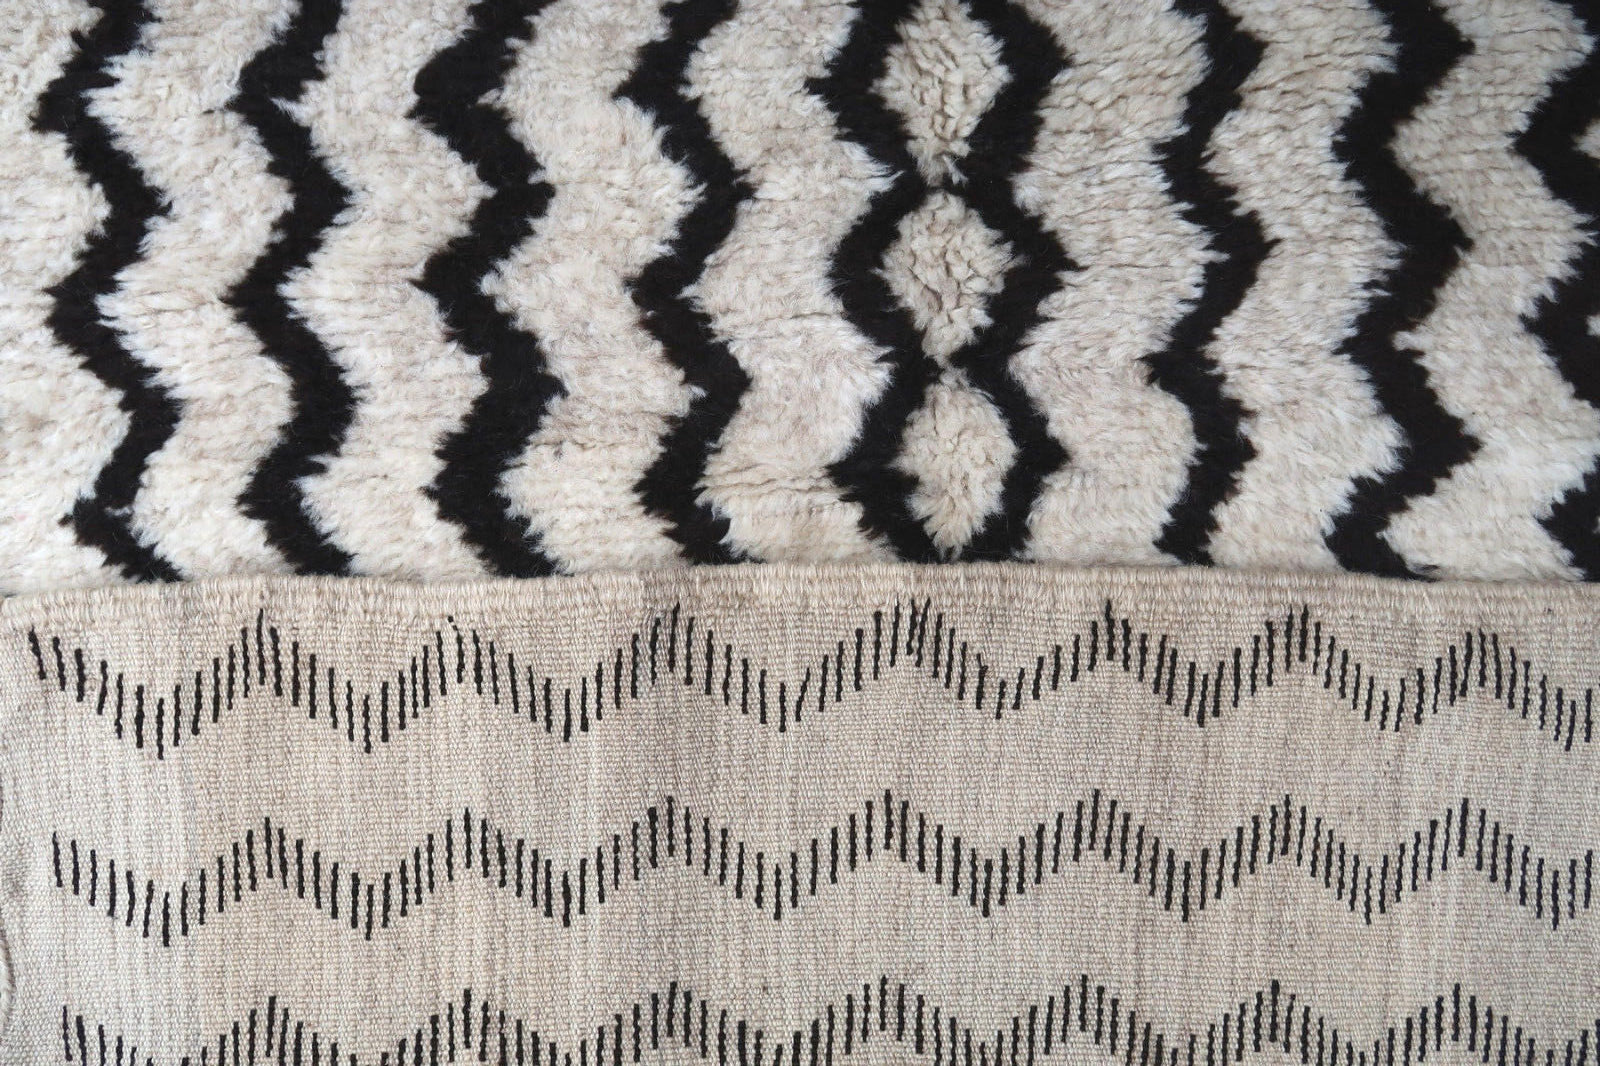 Handmade antique Moroccan Berber rug in geometric design. Ait Ouaouzguit tribe rug from Ourzazate region in the High Atlas, Morocco. The rug is from the middle of 20th century in original good condition.